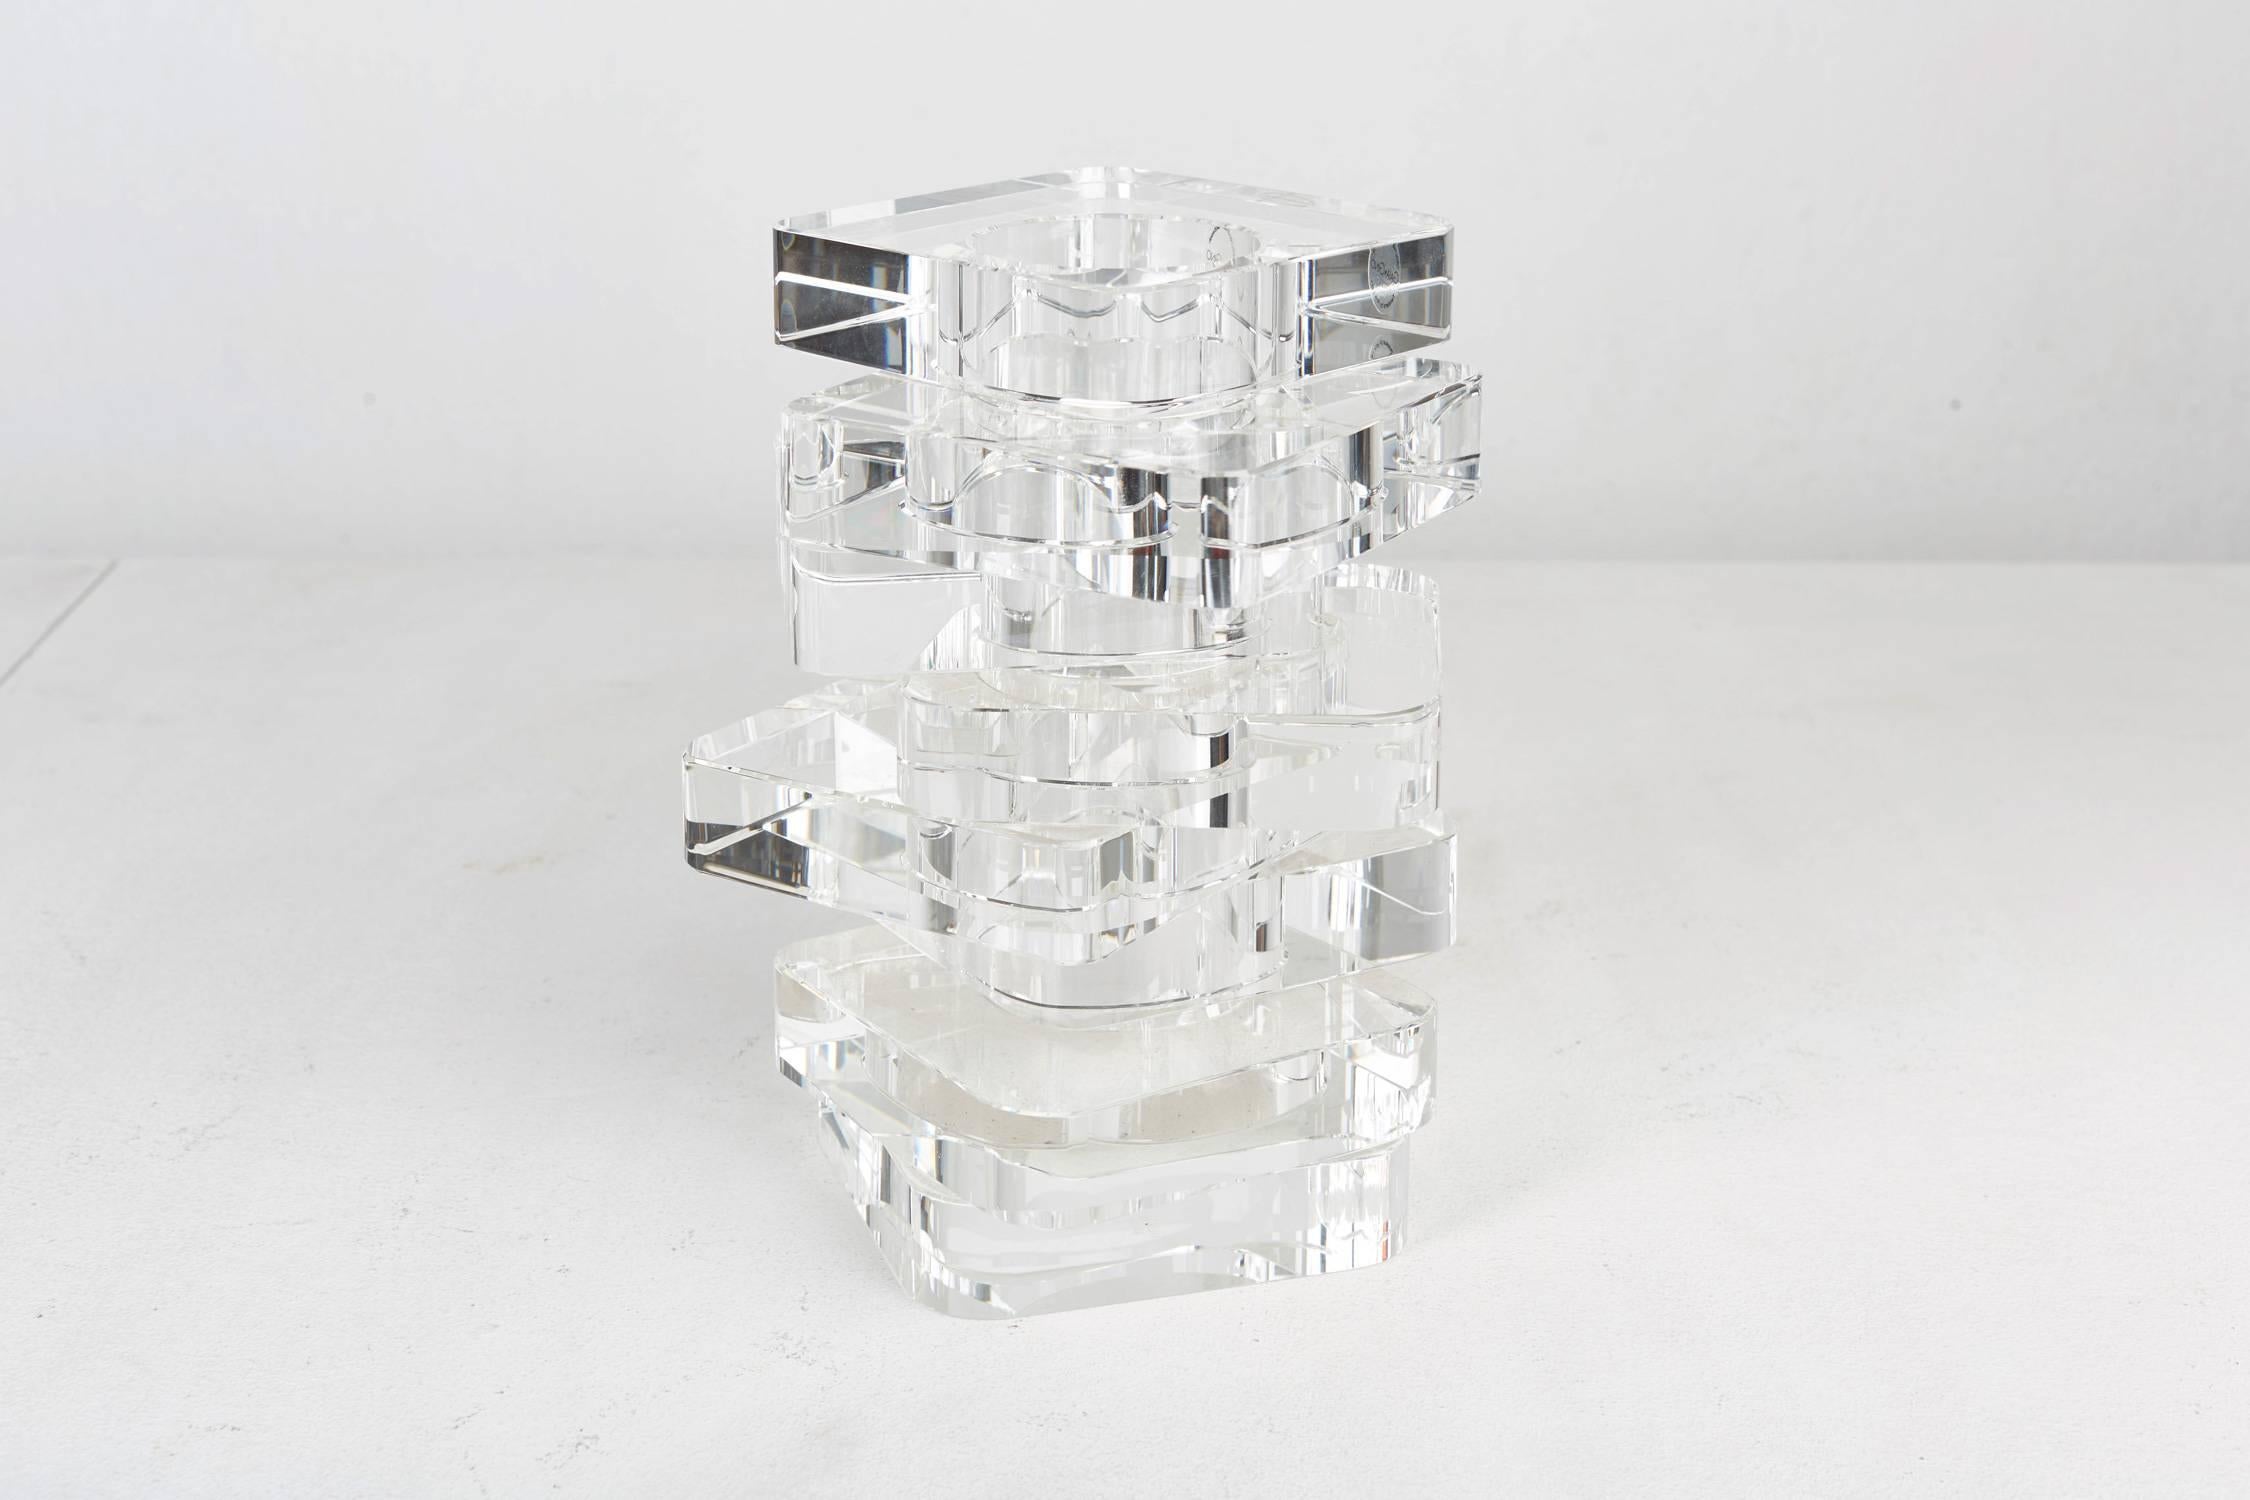 Vase from the 'Twisters' collection, optical glass, signed.
Designed by Arik Levy (2007).
Manufactured by Gaia & Gino (Turkey).
Optical glass.
Measures: H 20 cm, D 16.5 cm.
Out of production.